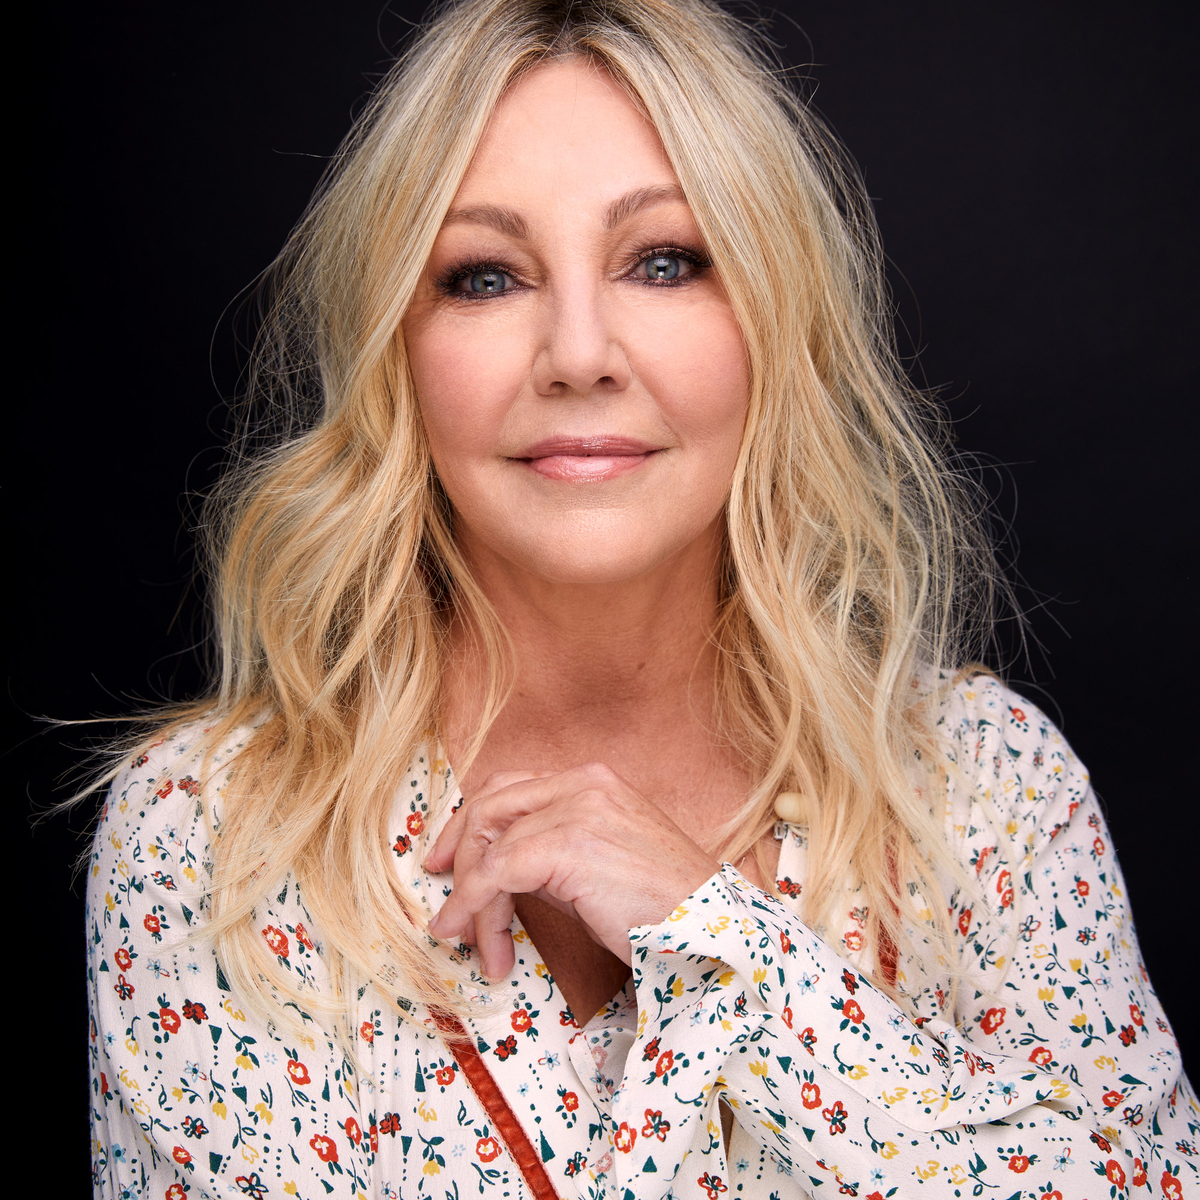 Melrose Place’s Heather Locklear to Make Rare Appearance at 90s Con